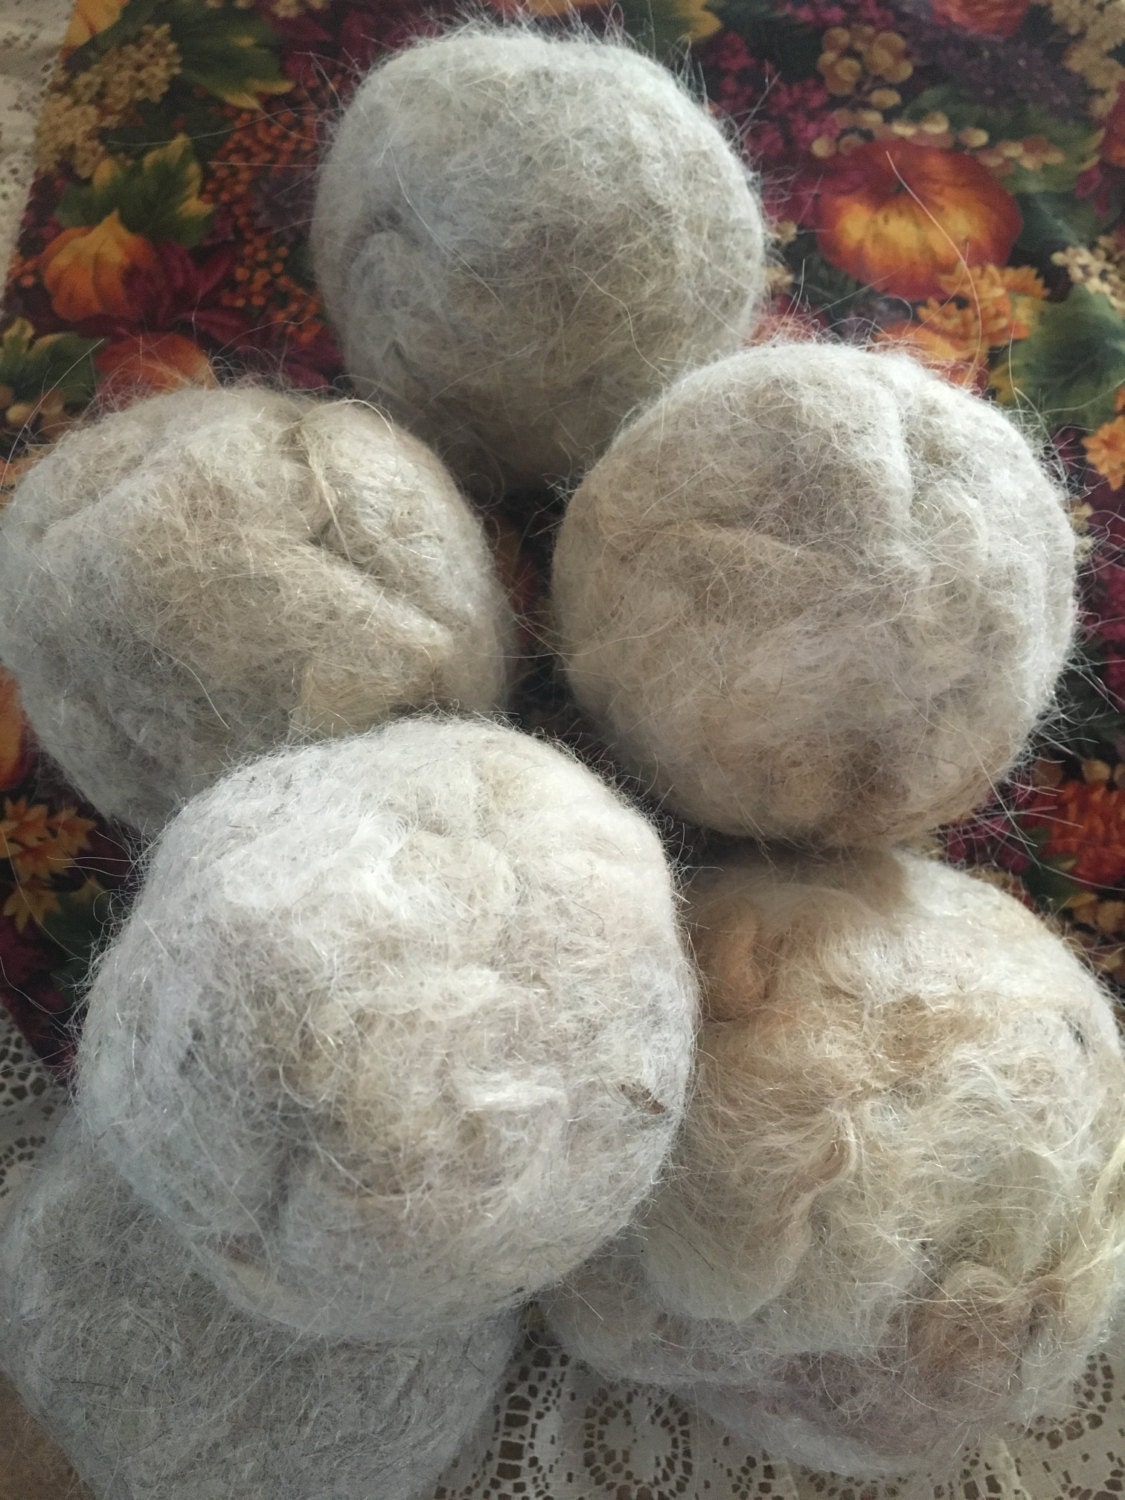 Infused Wool Dryer Balls - Cottage in the Oaks